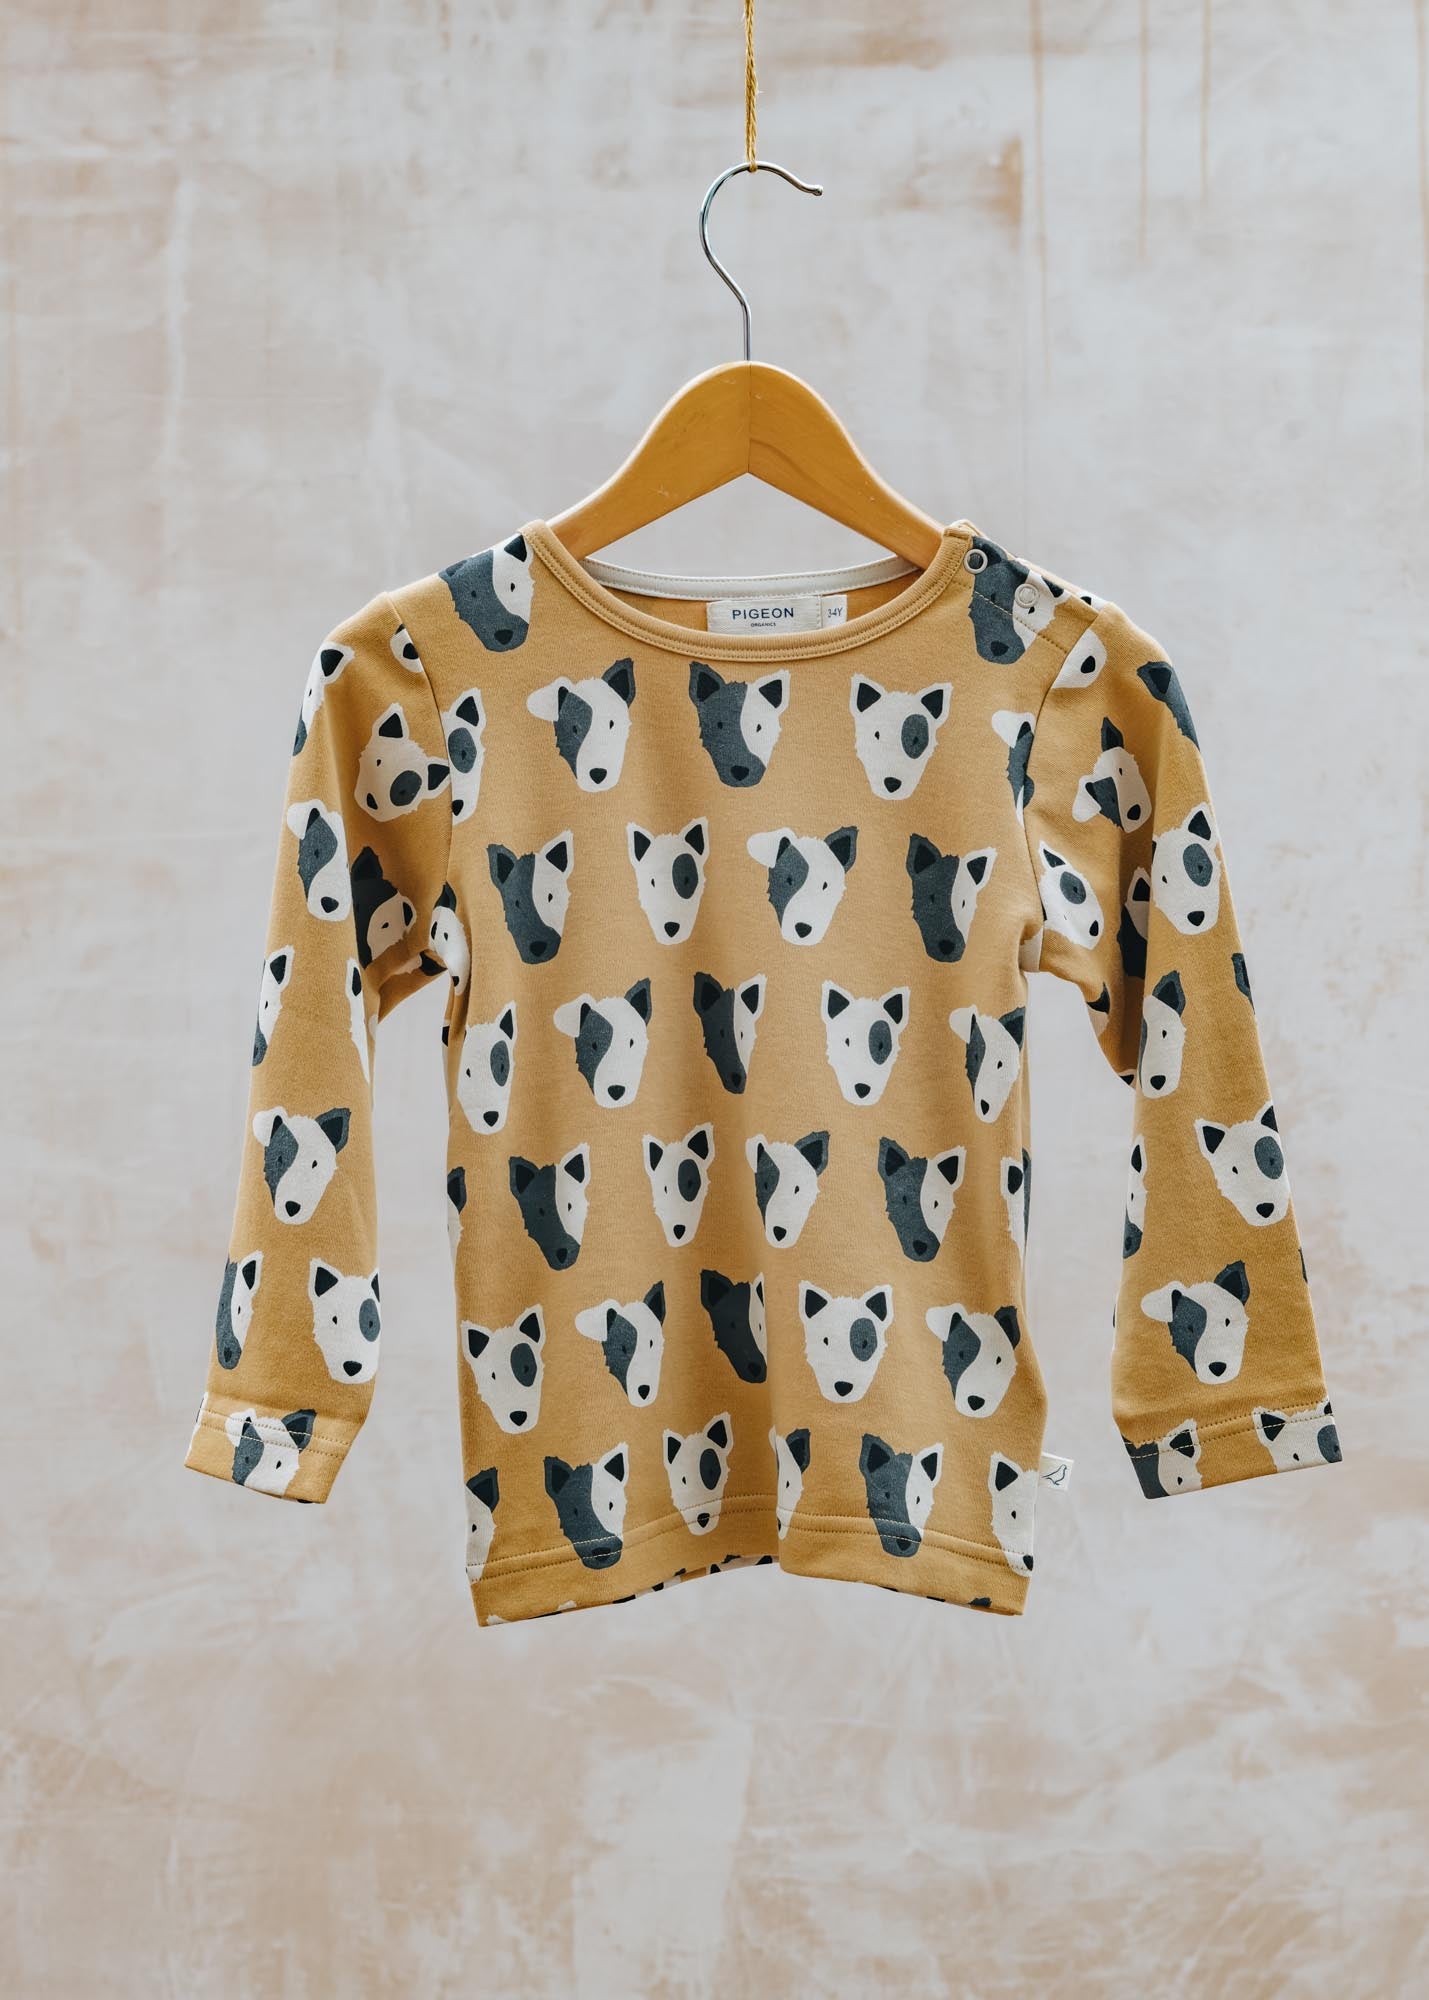 Pigeon Organics Children's Long Sleeved T-Shirt in Mustard with Dogs